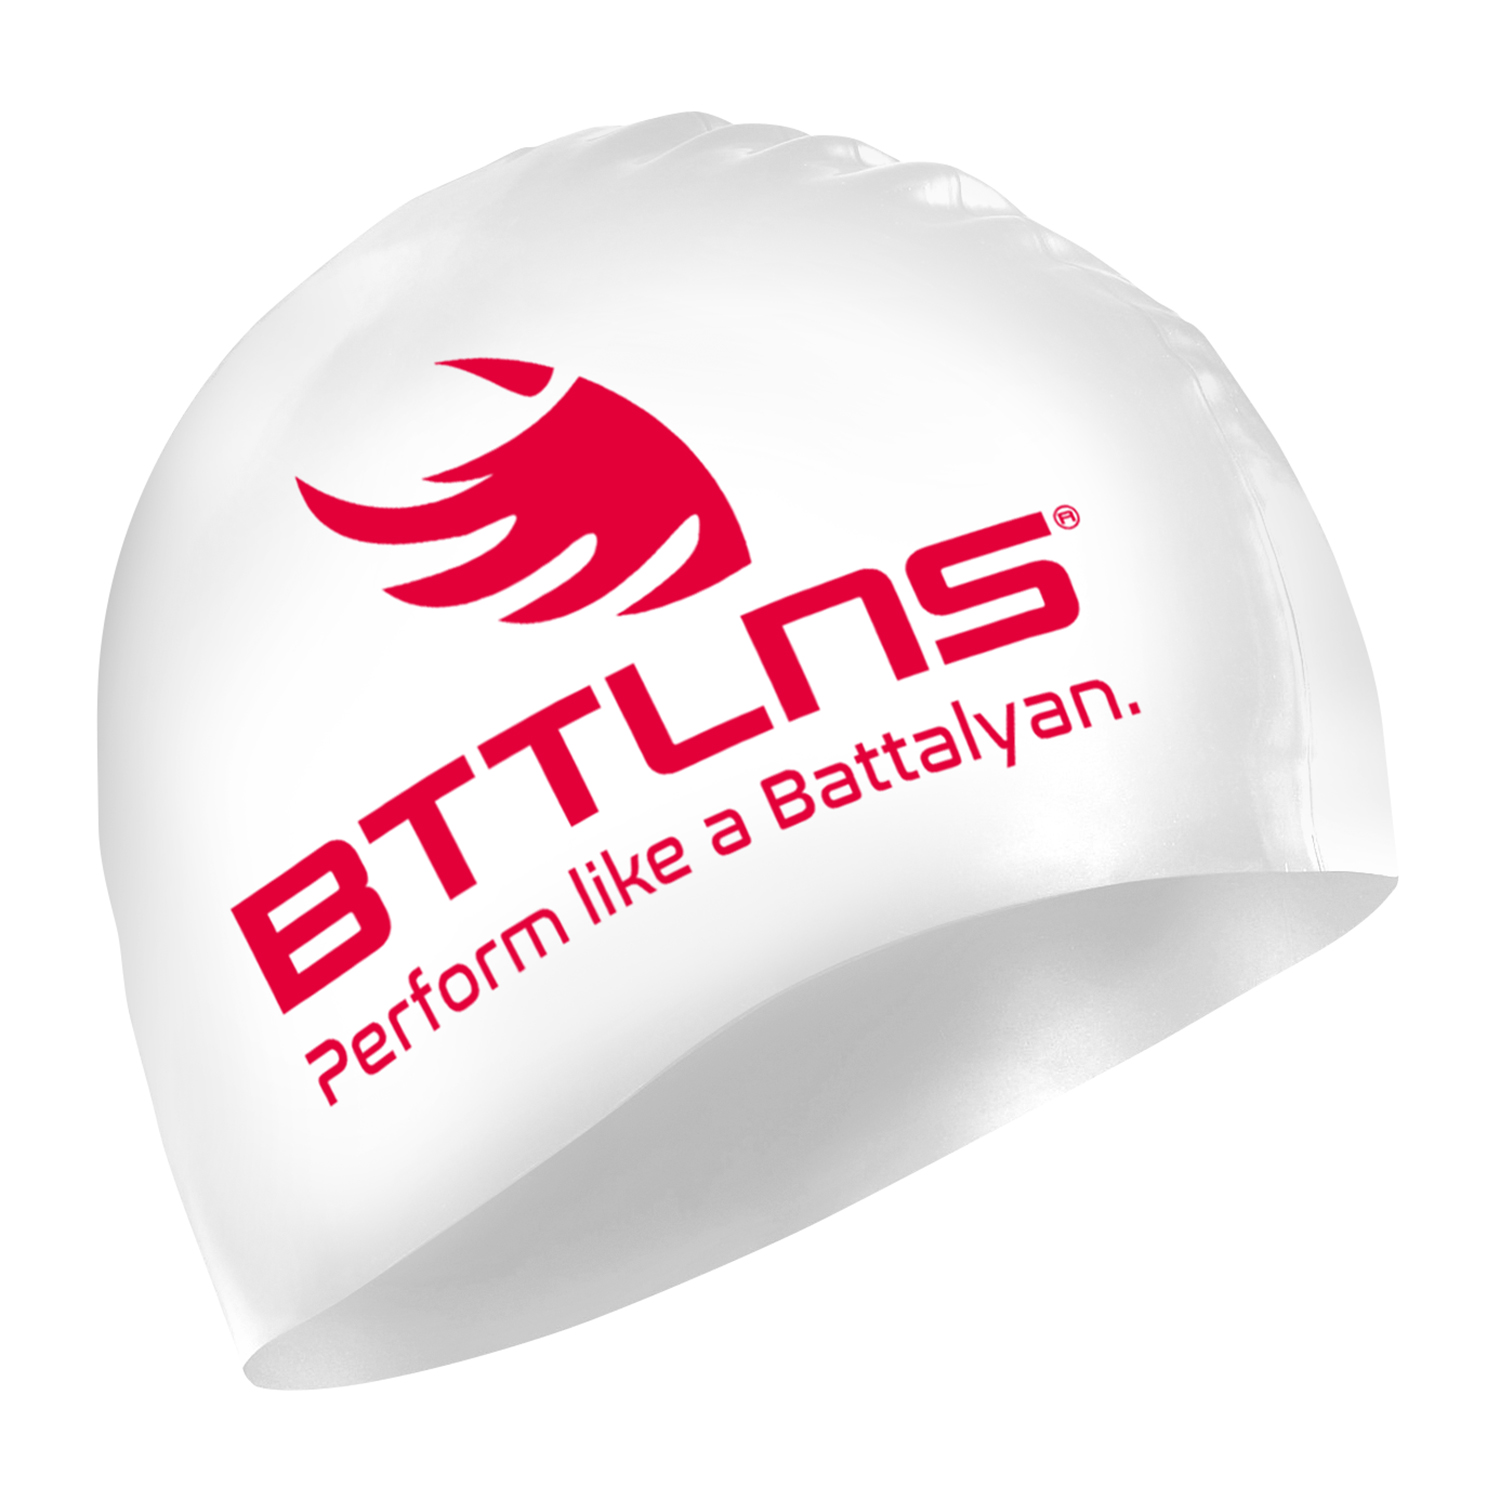 BTTLNS Absorber 2.0 Silicone swimcap white/red  0318005-102